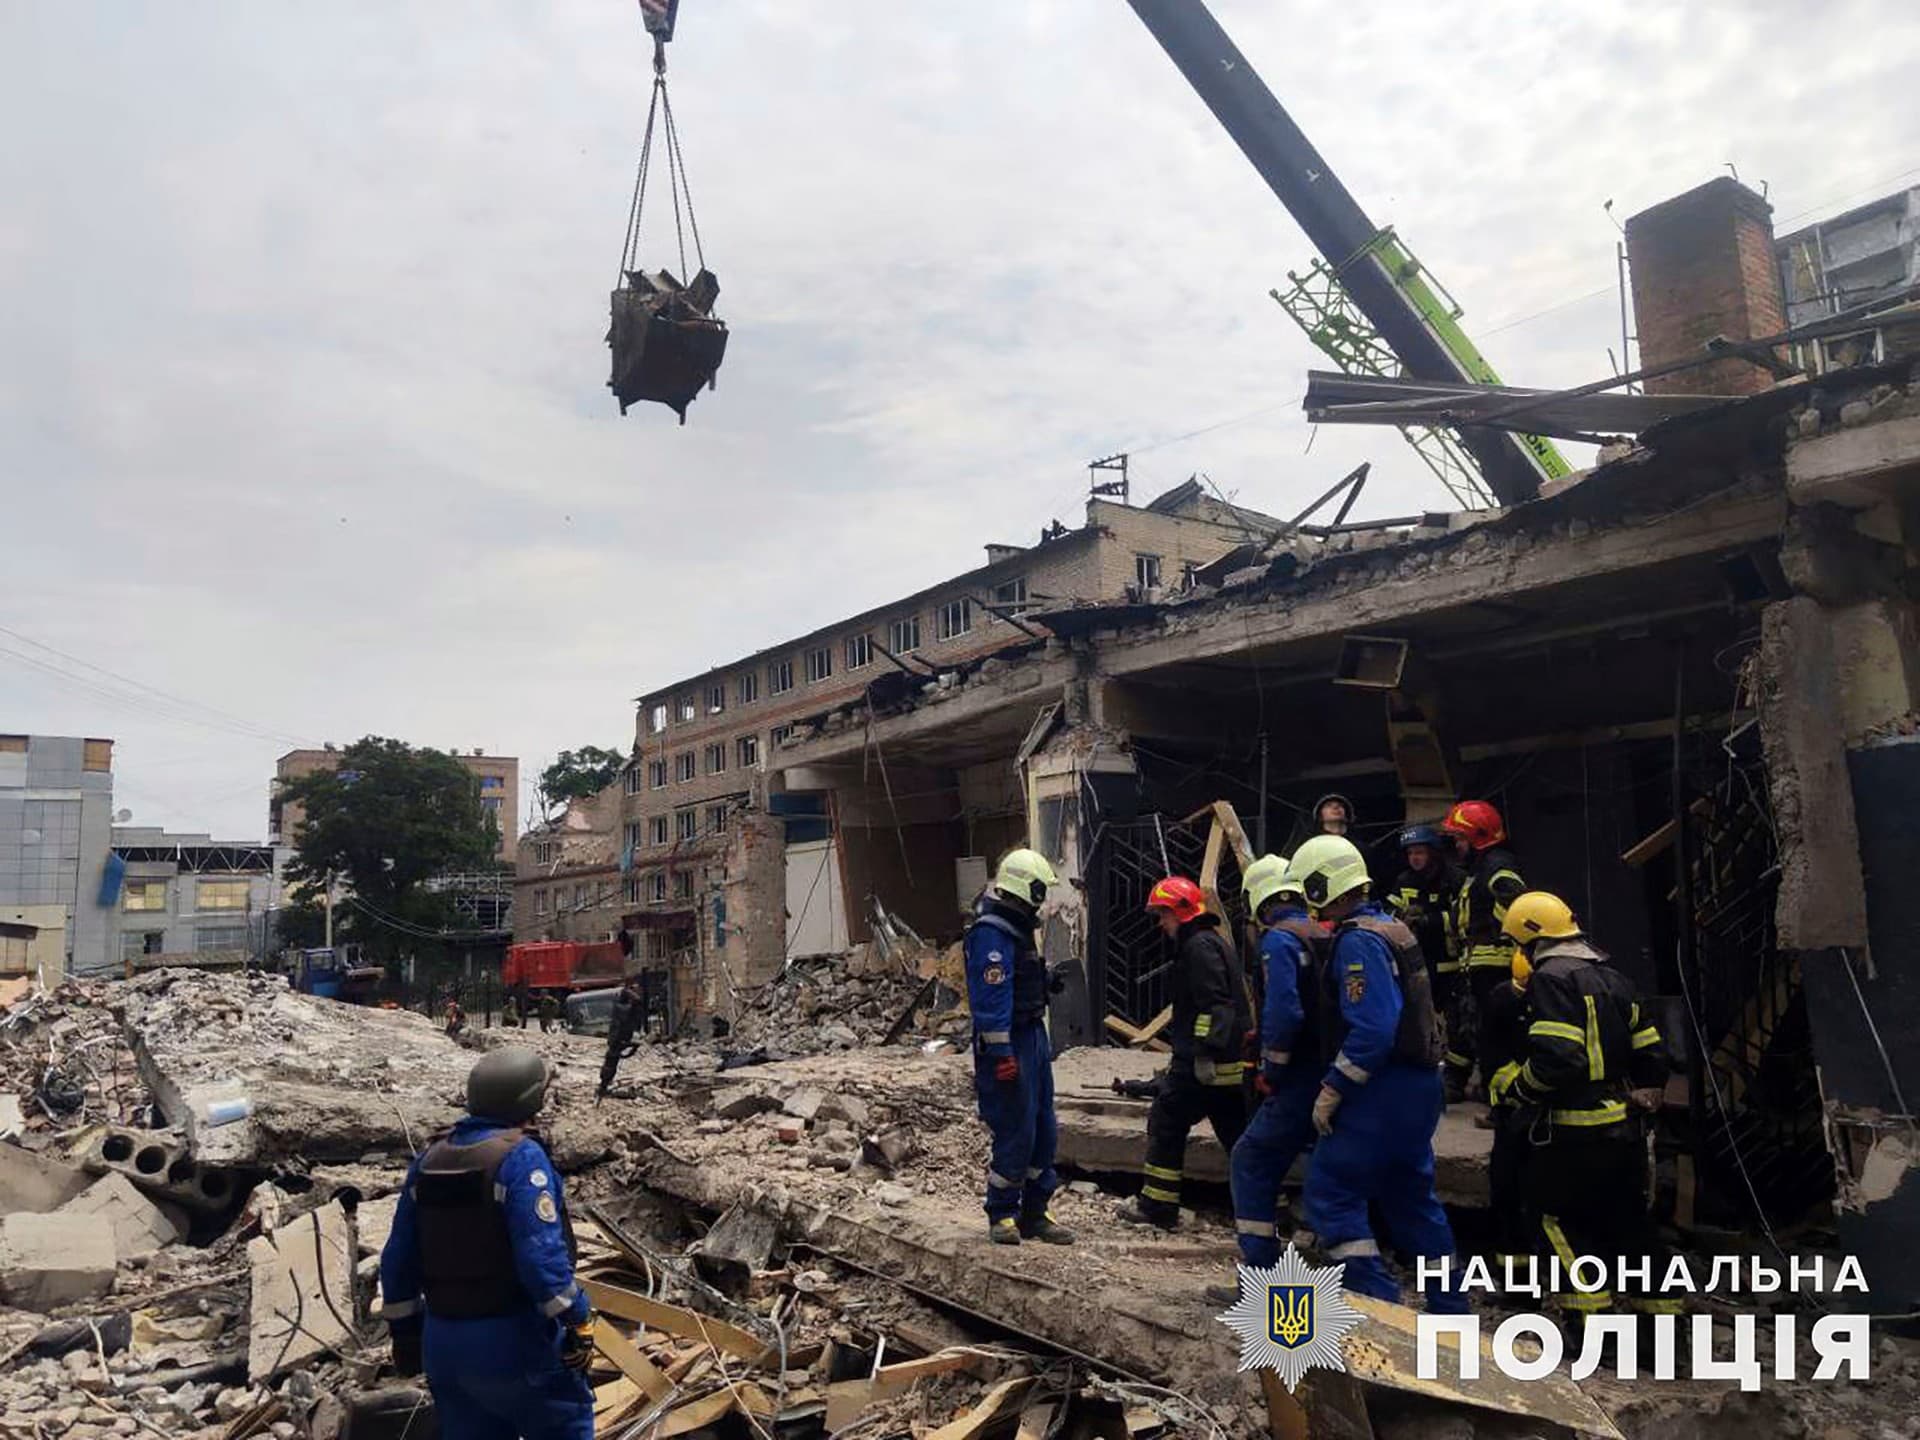 Rescuers worked to search for survivors of the Ria Lounge Bar missile strike in Kramatorsk